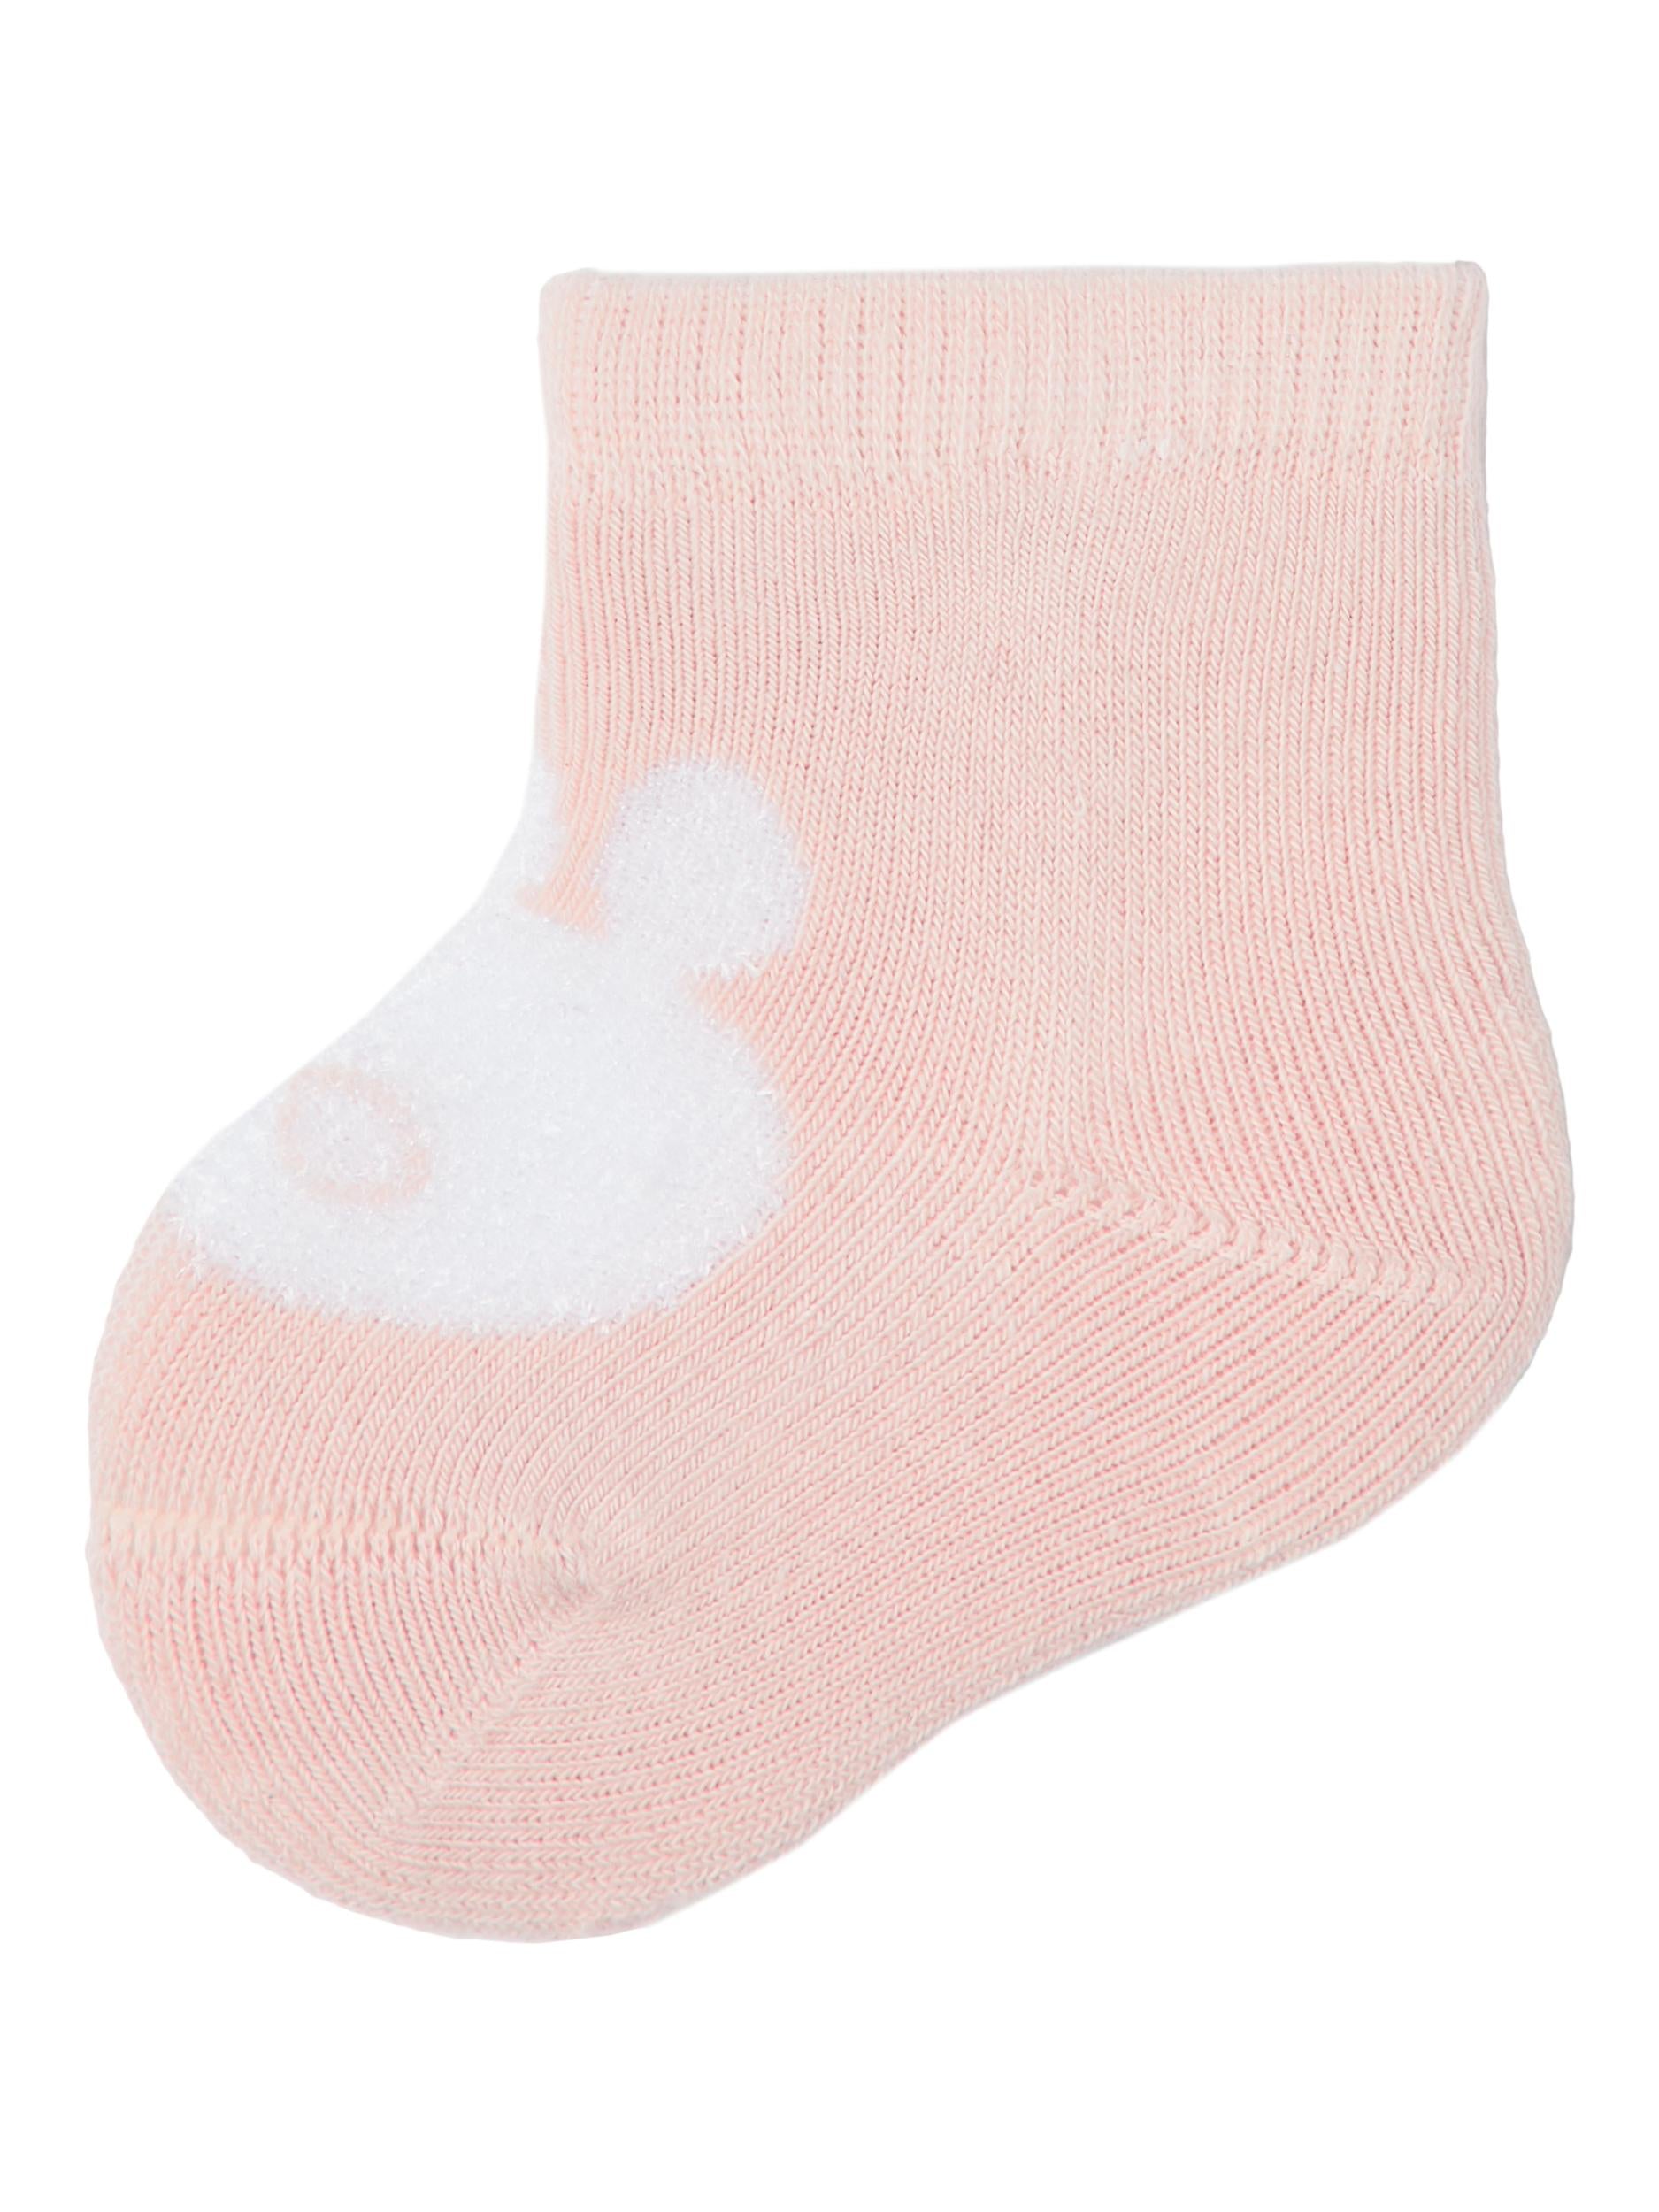 Gril's Rose Smoke Damy Terry Frotte Sock-Side View